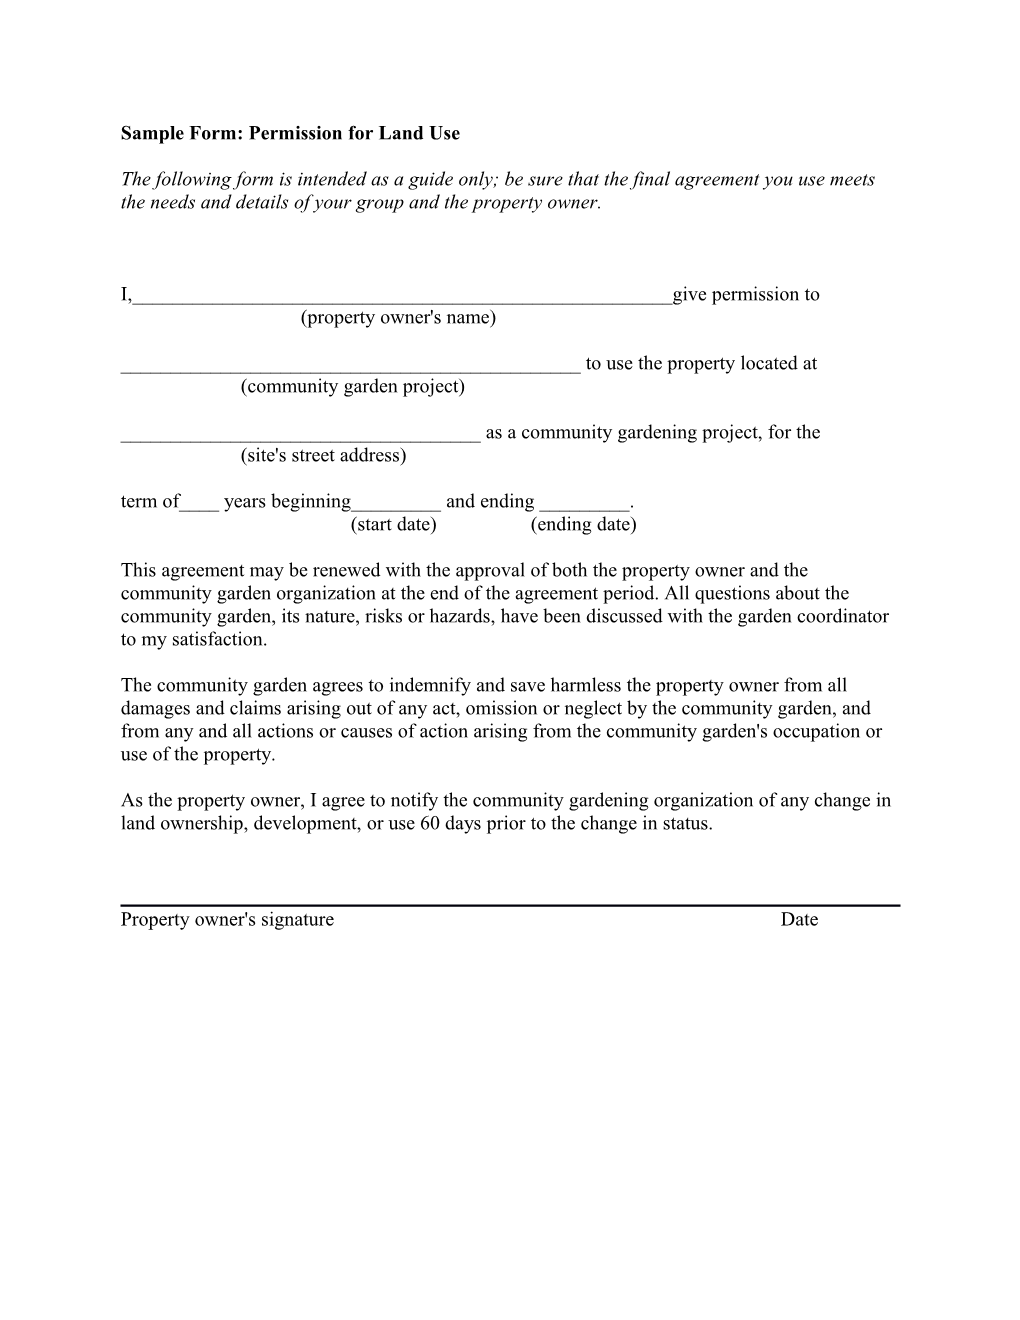 Sample Form: Permission For Land Use